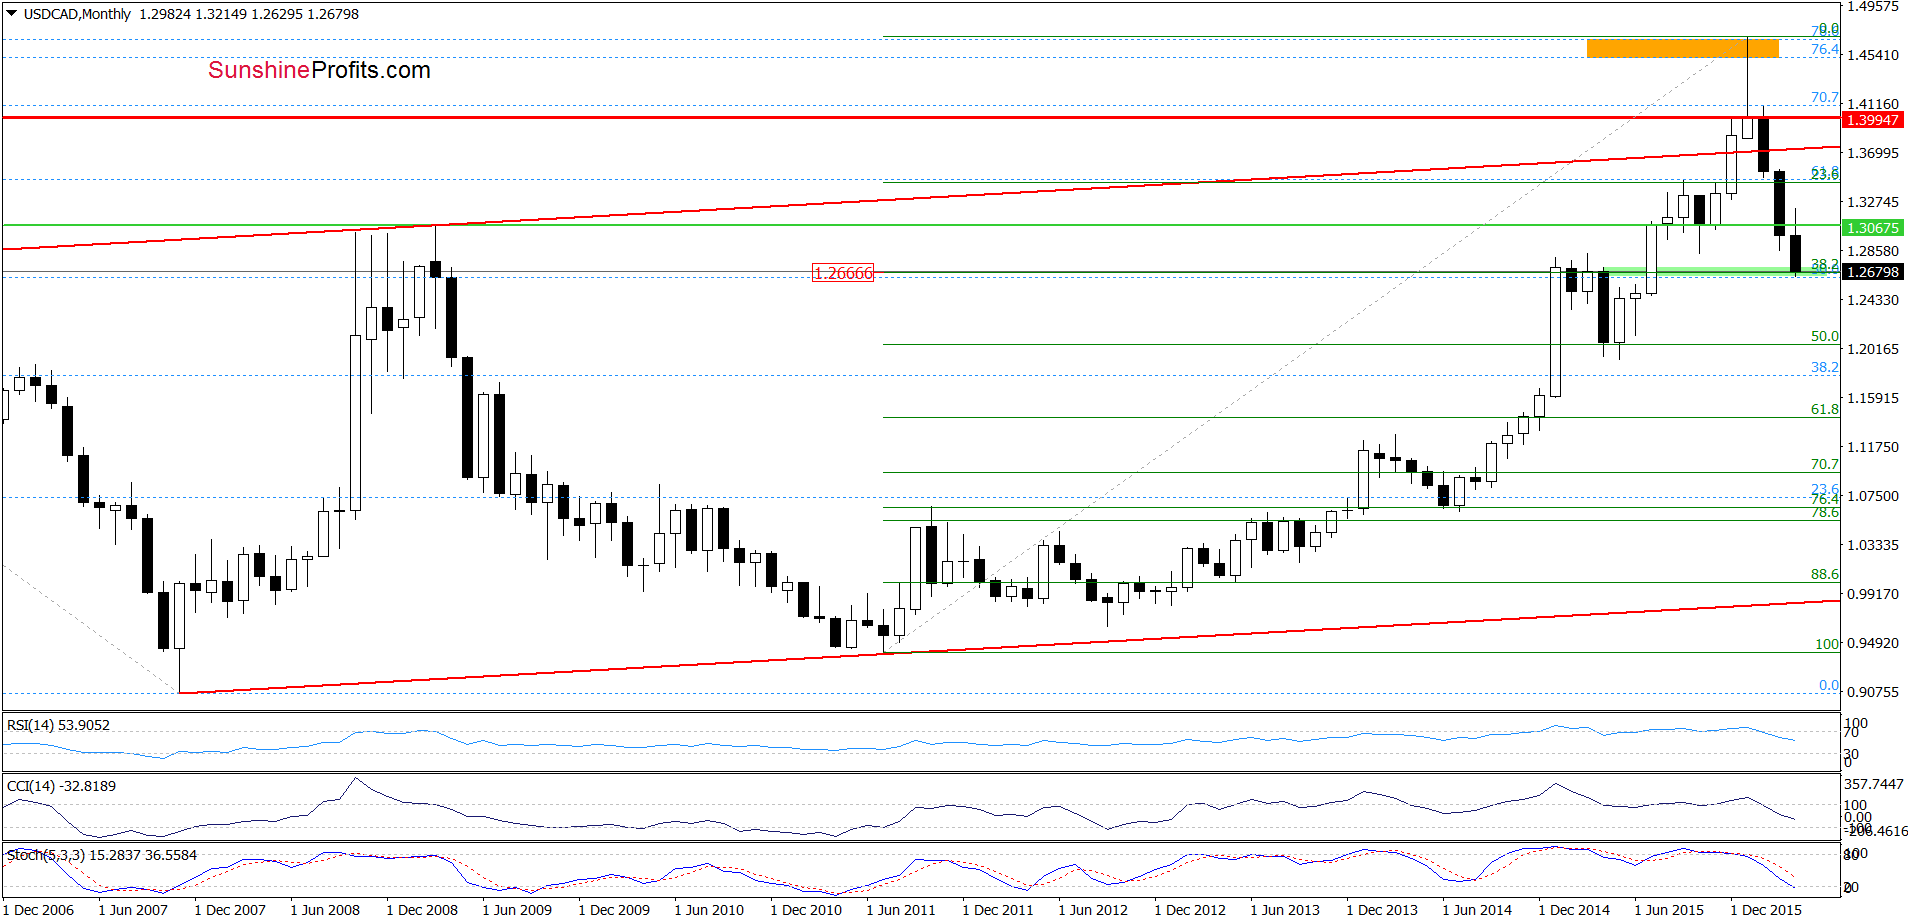 USD/CAD - the monthly chart